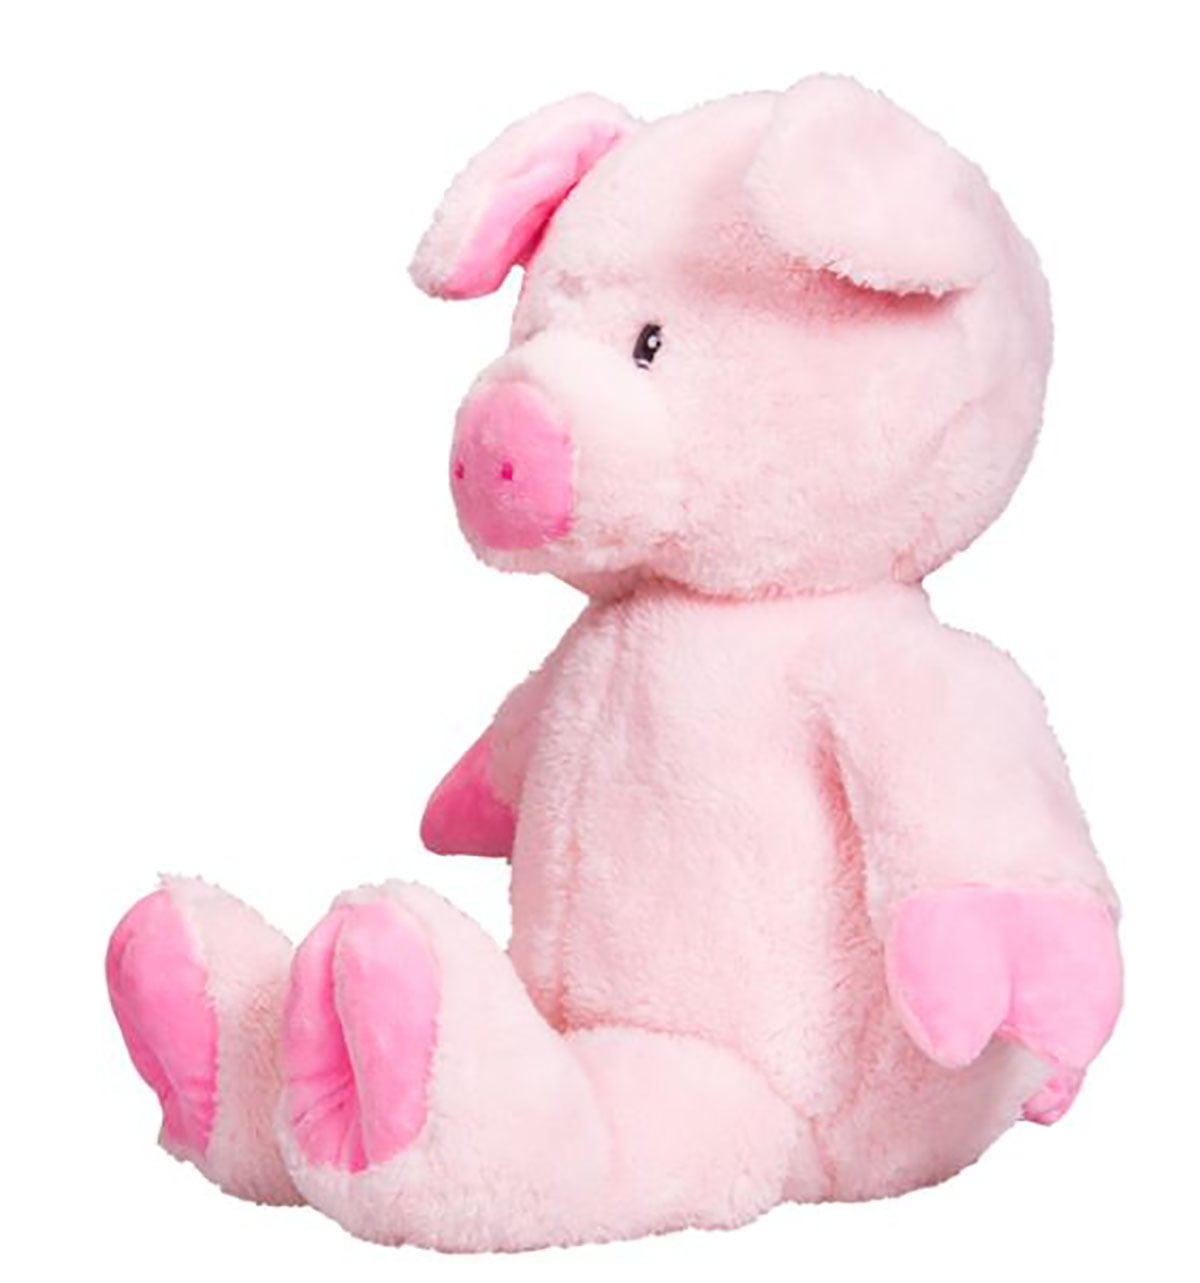 Details about   Valentine's Gifts Lovely Samsoon's PIG Stuffed animals lover gifts 16" new 